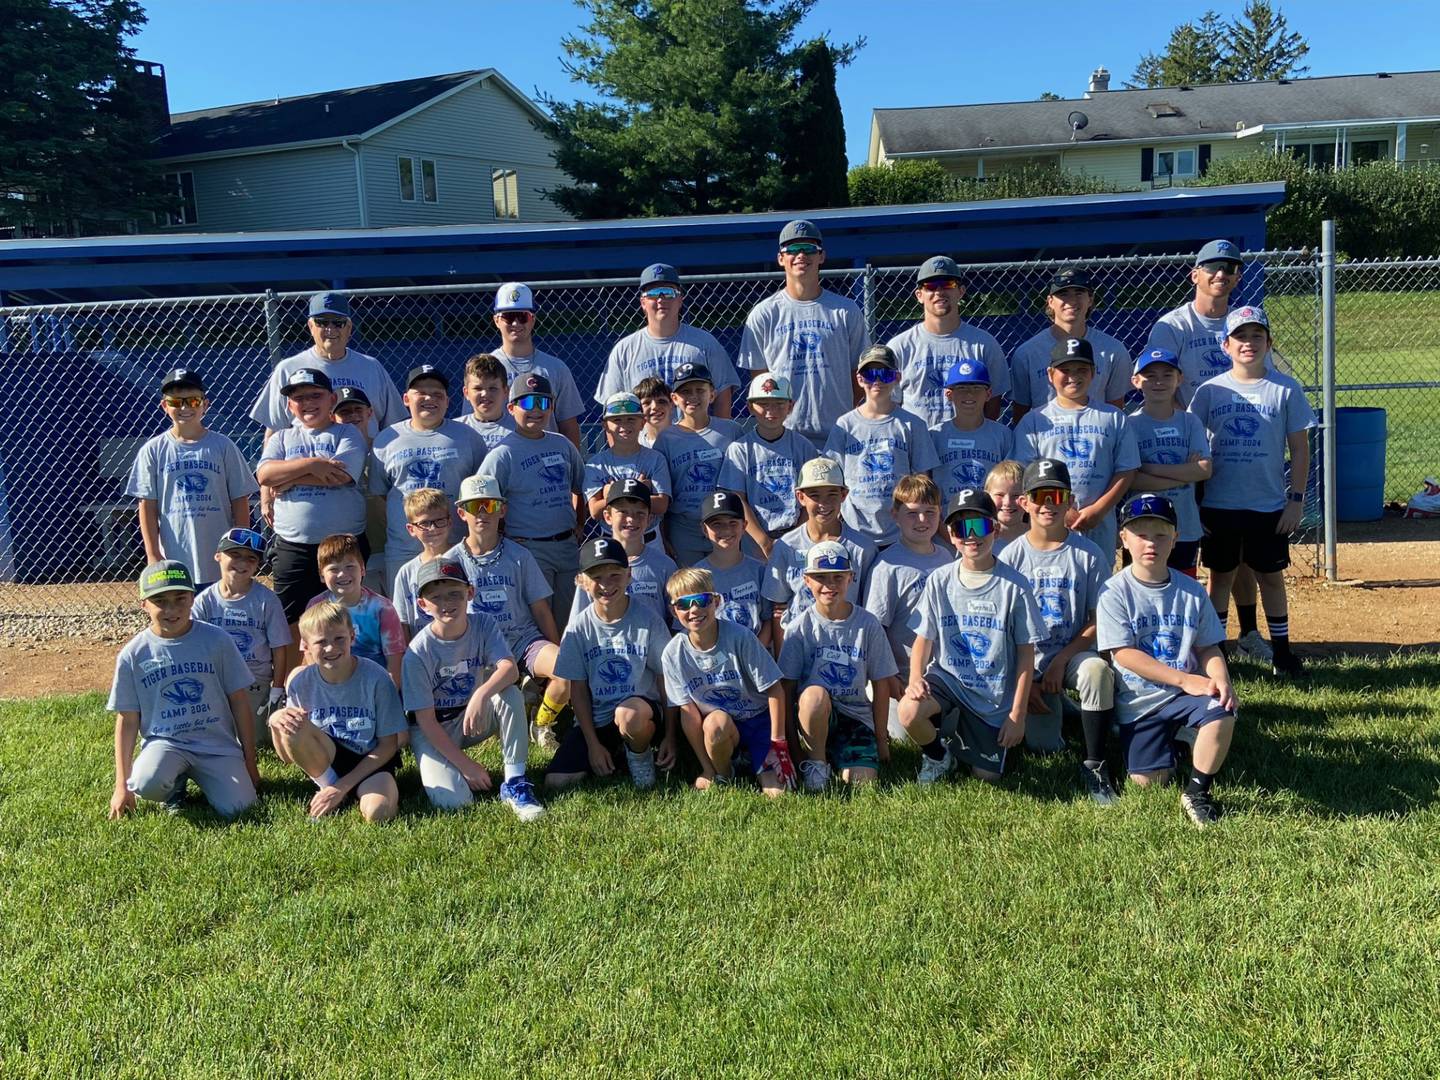 The grade 6-8 session for this year's Princeton Tiger Baseball Camp.